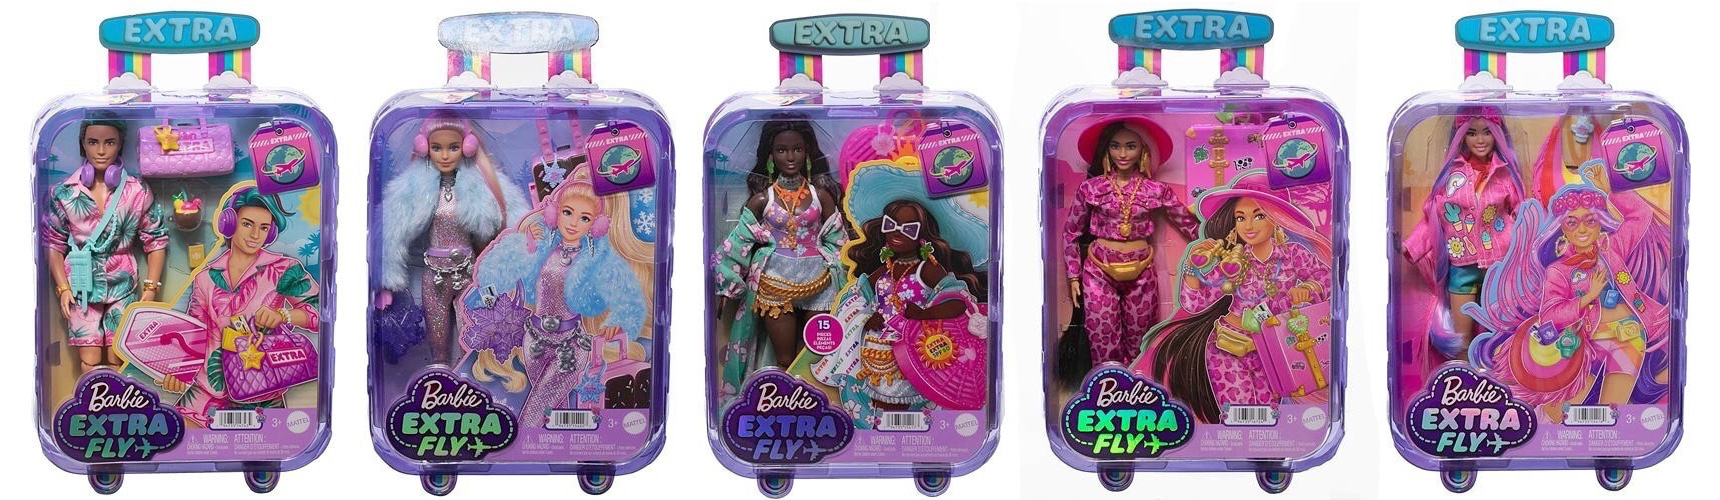 1684410966 Youloveit Com Barbie Extra Fly Boxes 